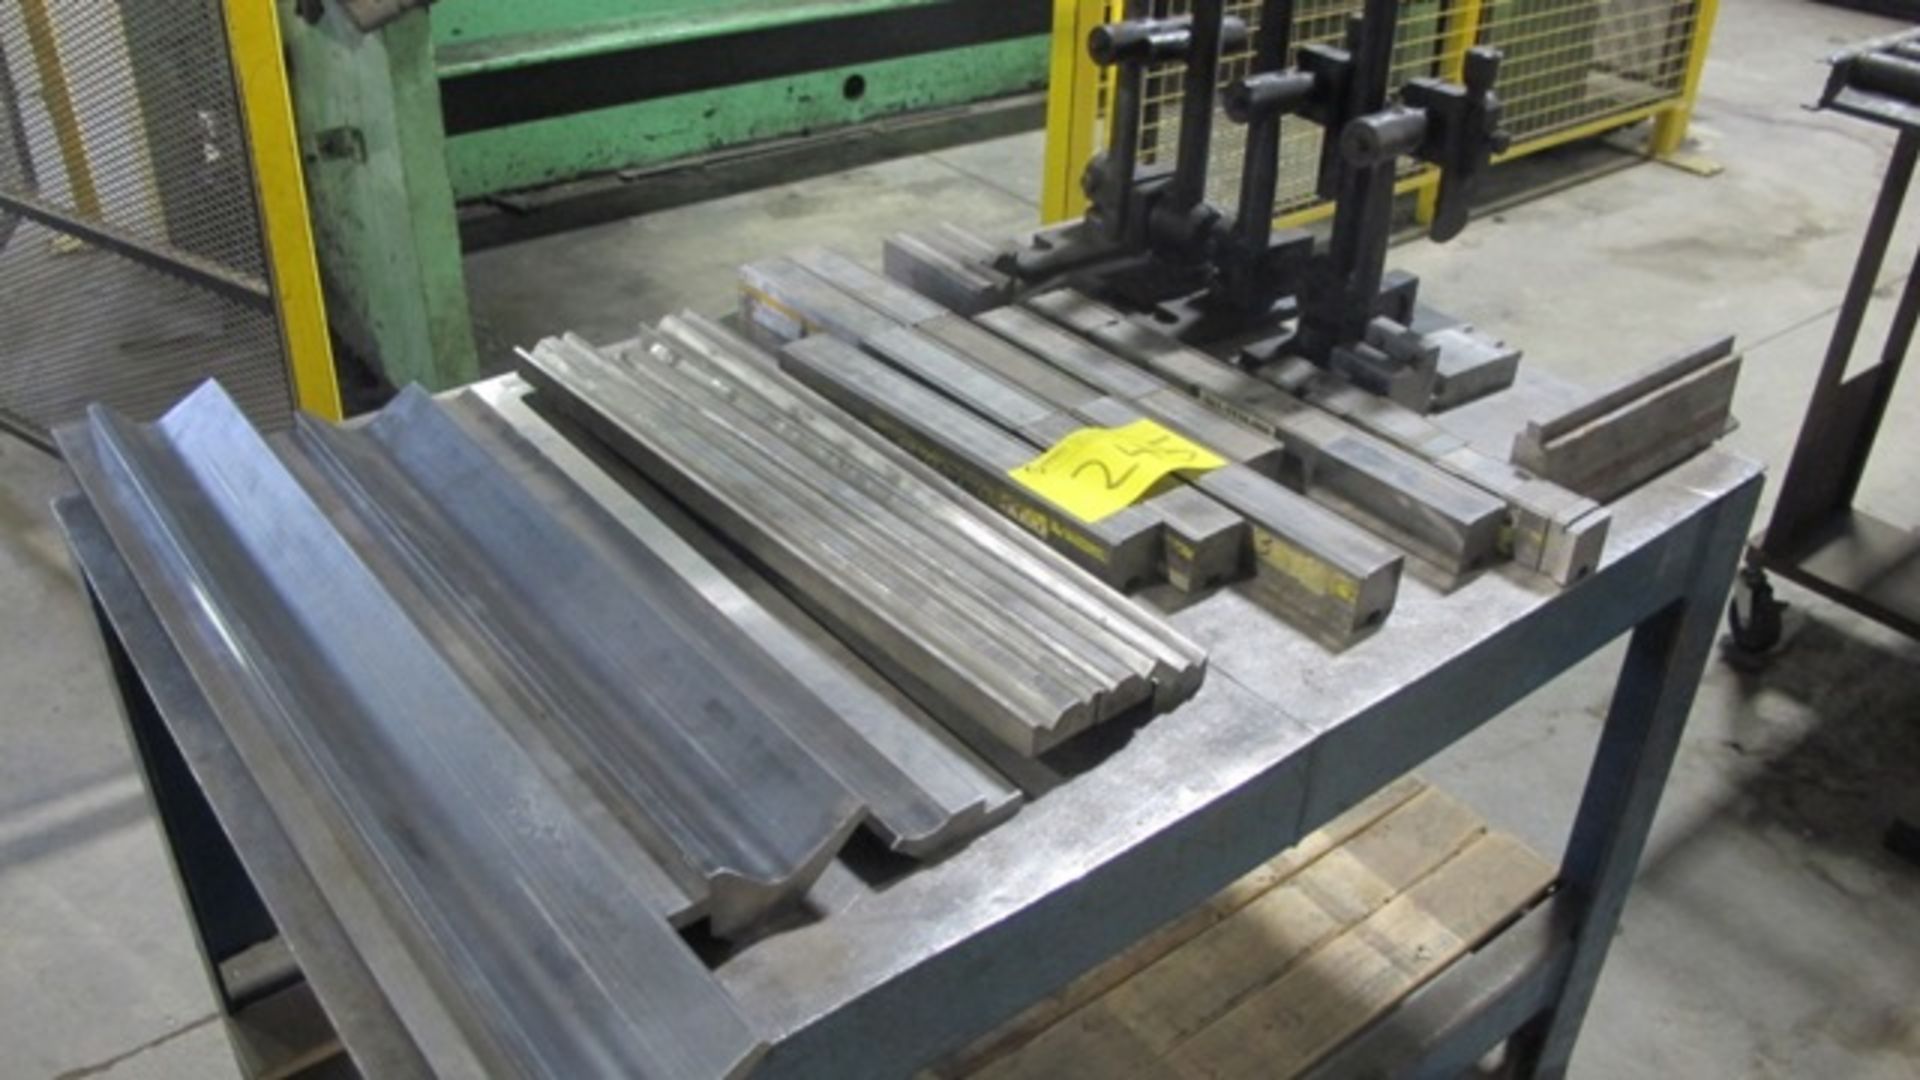 QUANTITY OF PRESS BRAKE DIES (UP TO 64"L) W/3 METAL TABLES - Image 4 of 4